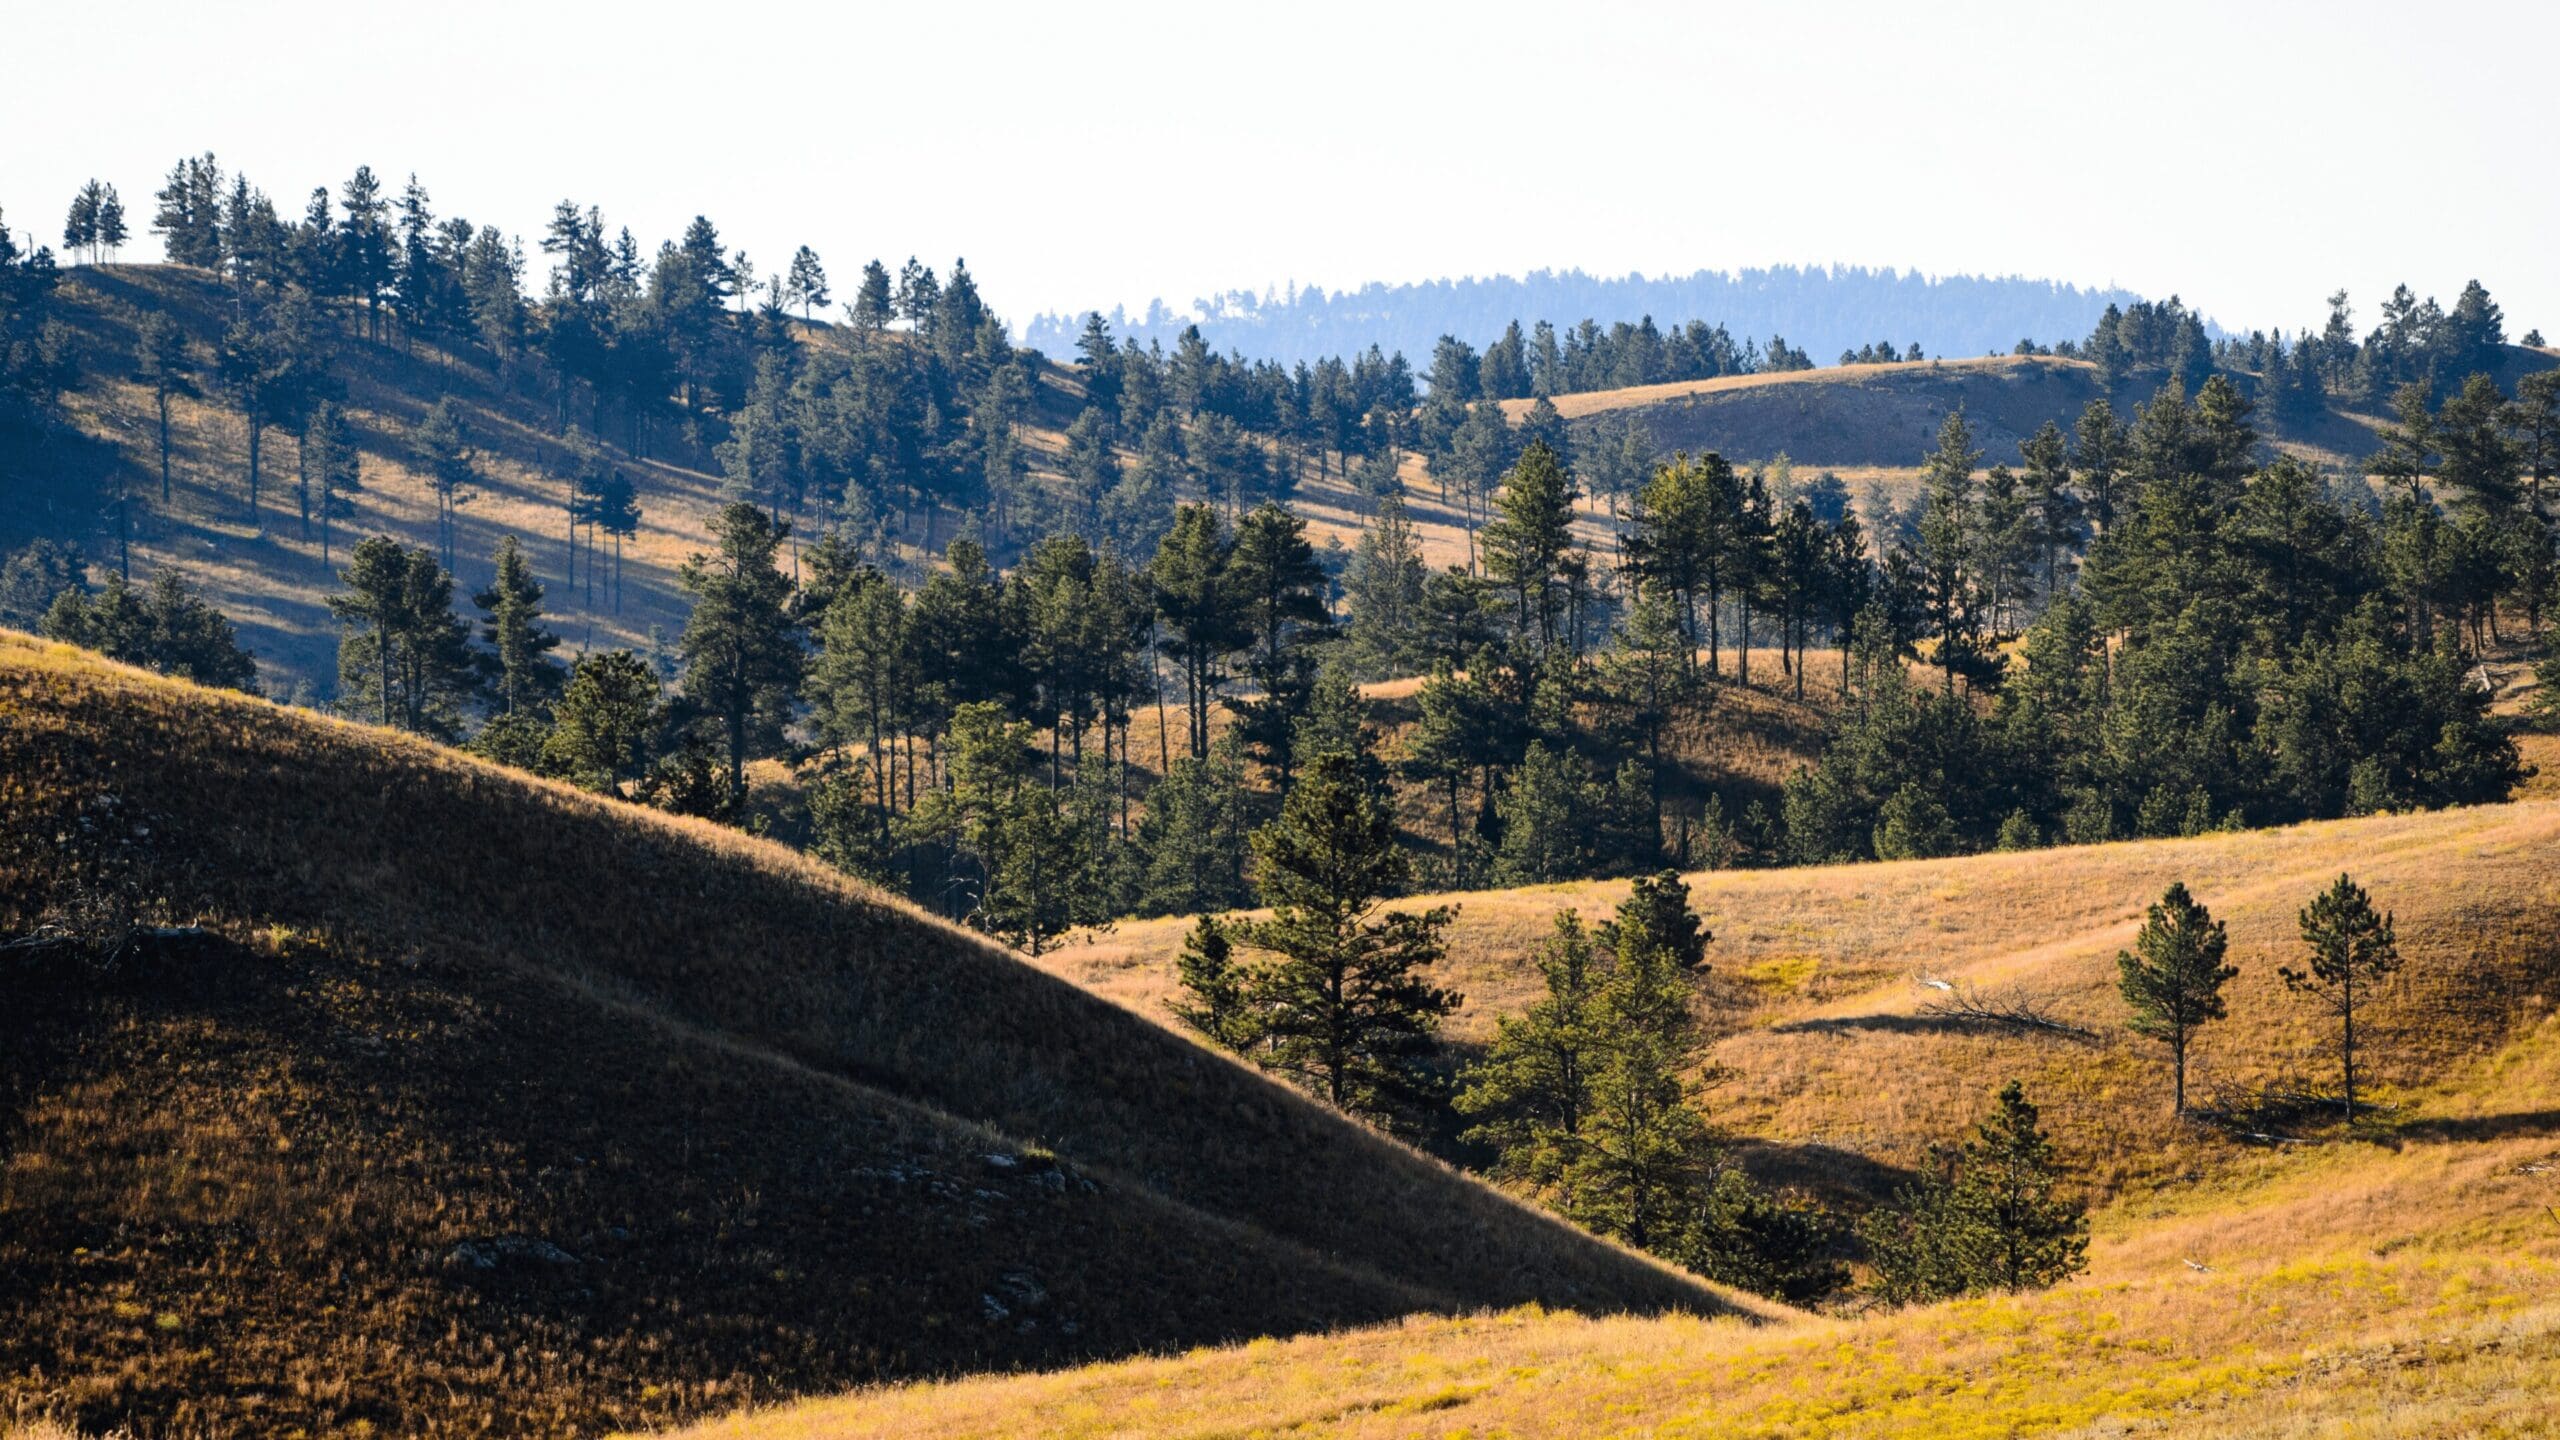 beautiful rolling hills with yellow dried grass and pine trees dotting them